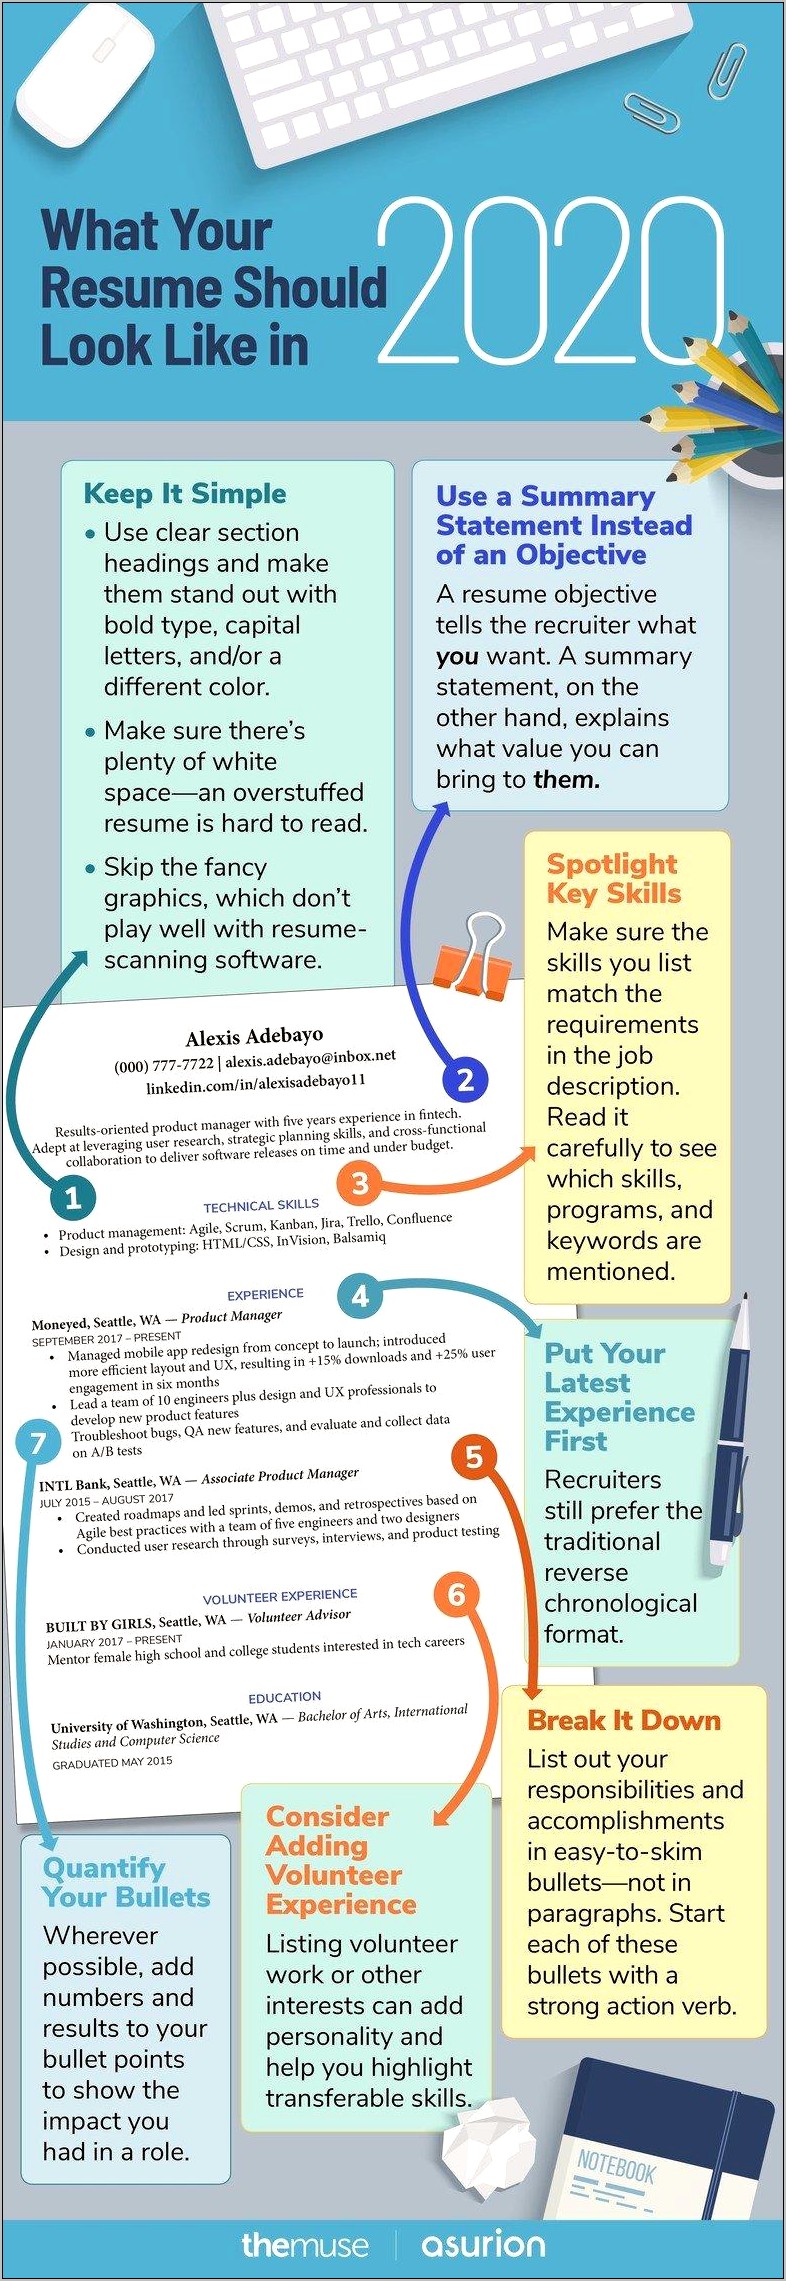 Picking The Best Keywords For Your Resume